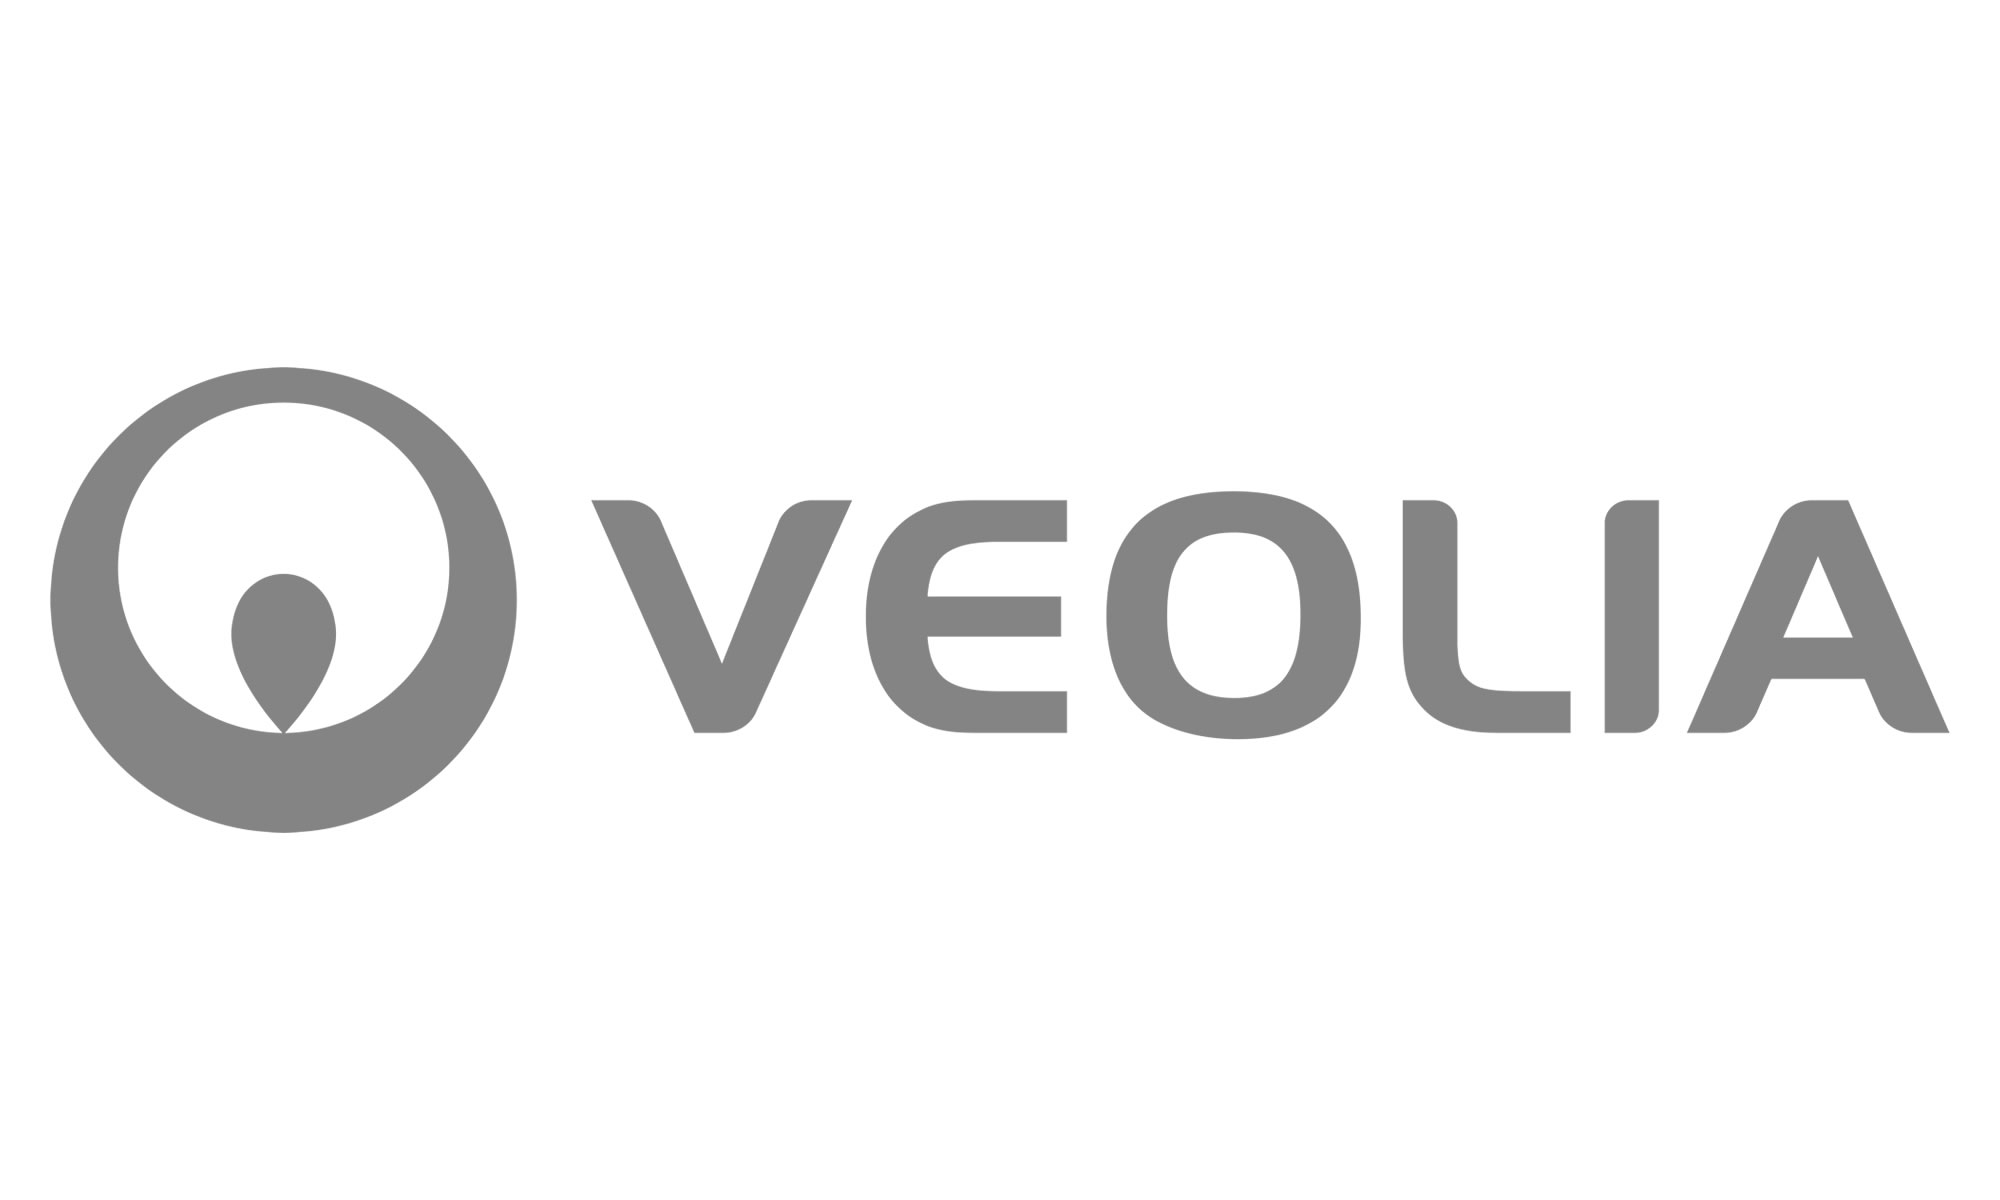 Veolia group is the global leader in optimized resource management